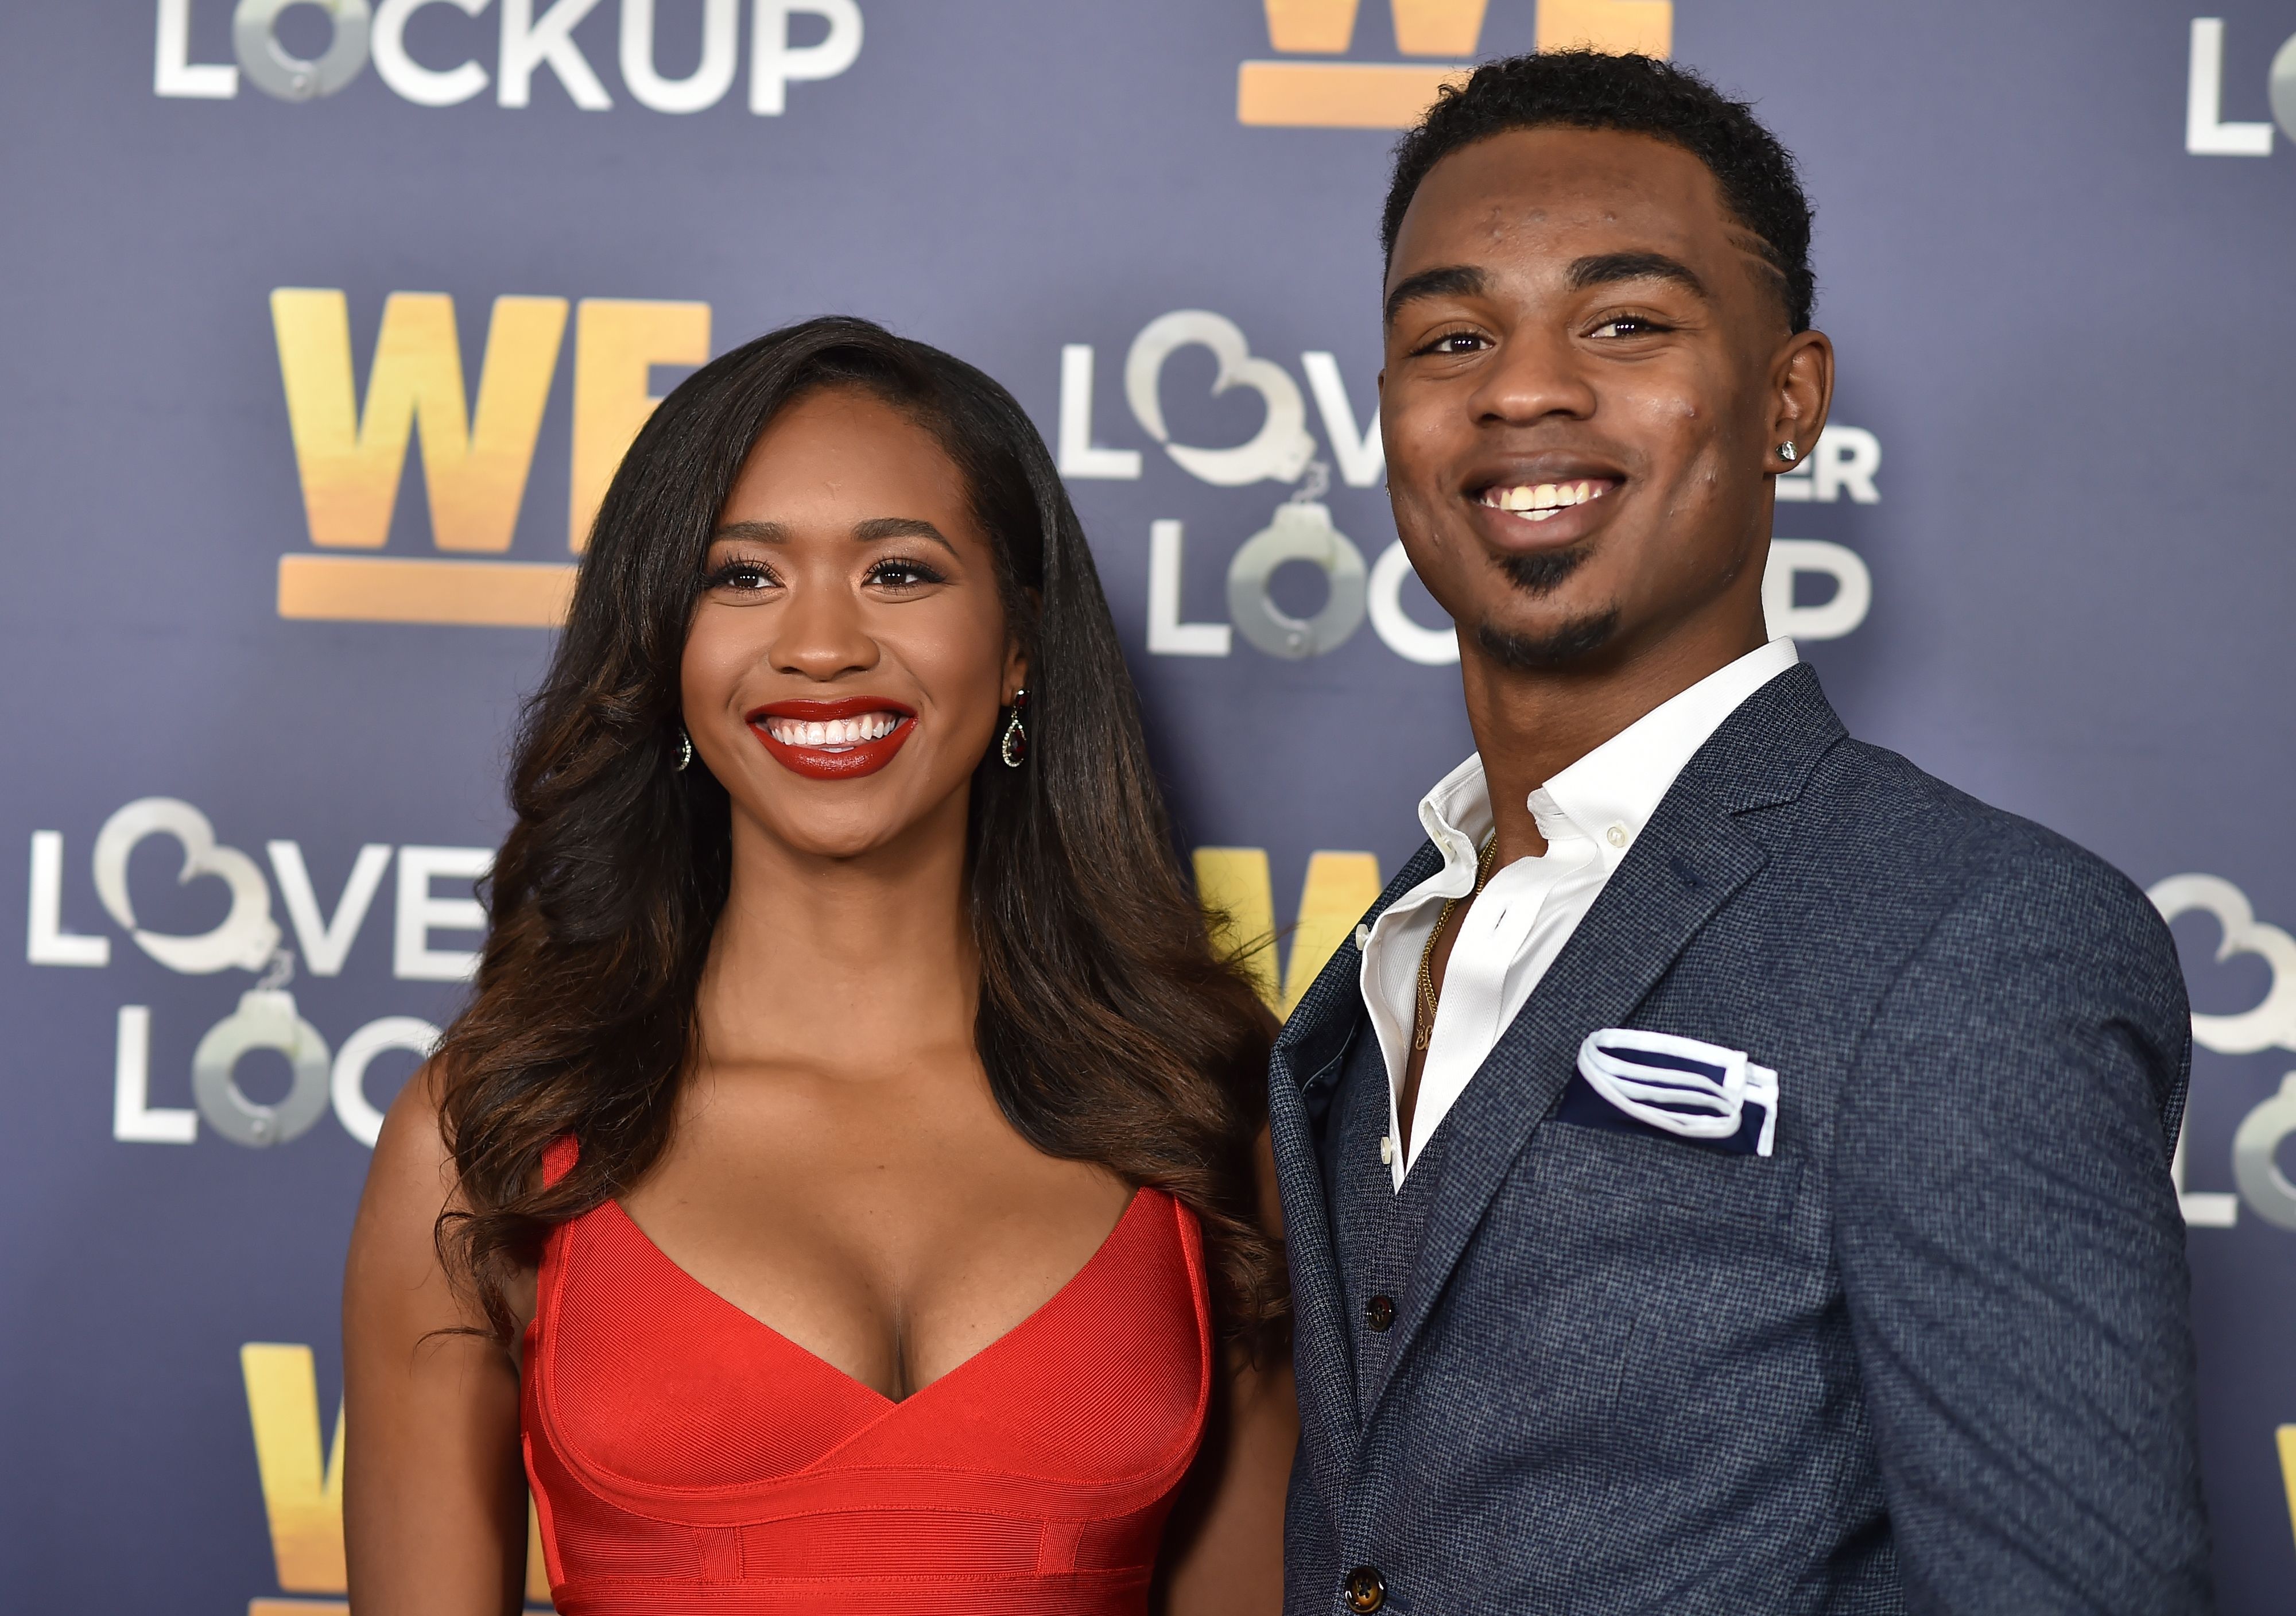 Bayleigh Dayton and Chris "Swaggy C" Williams in 2018